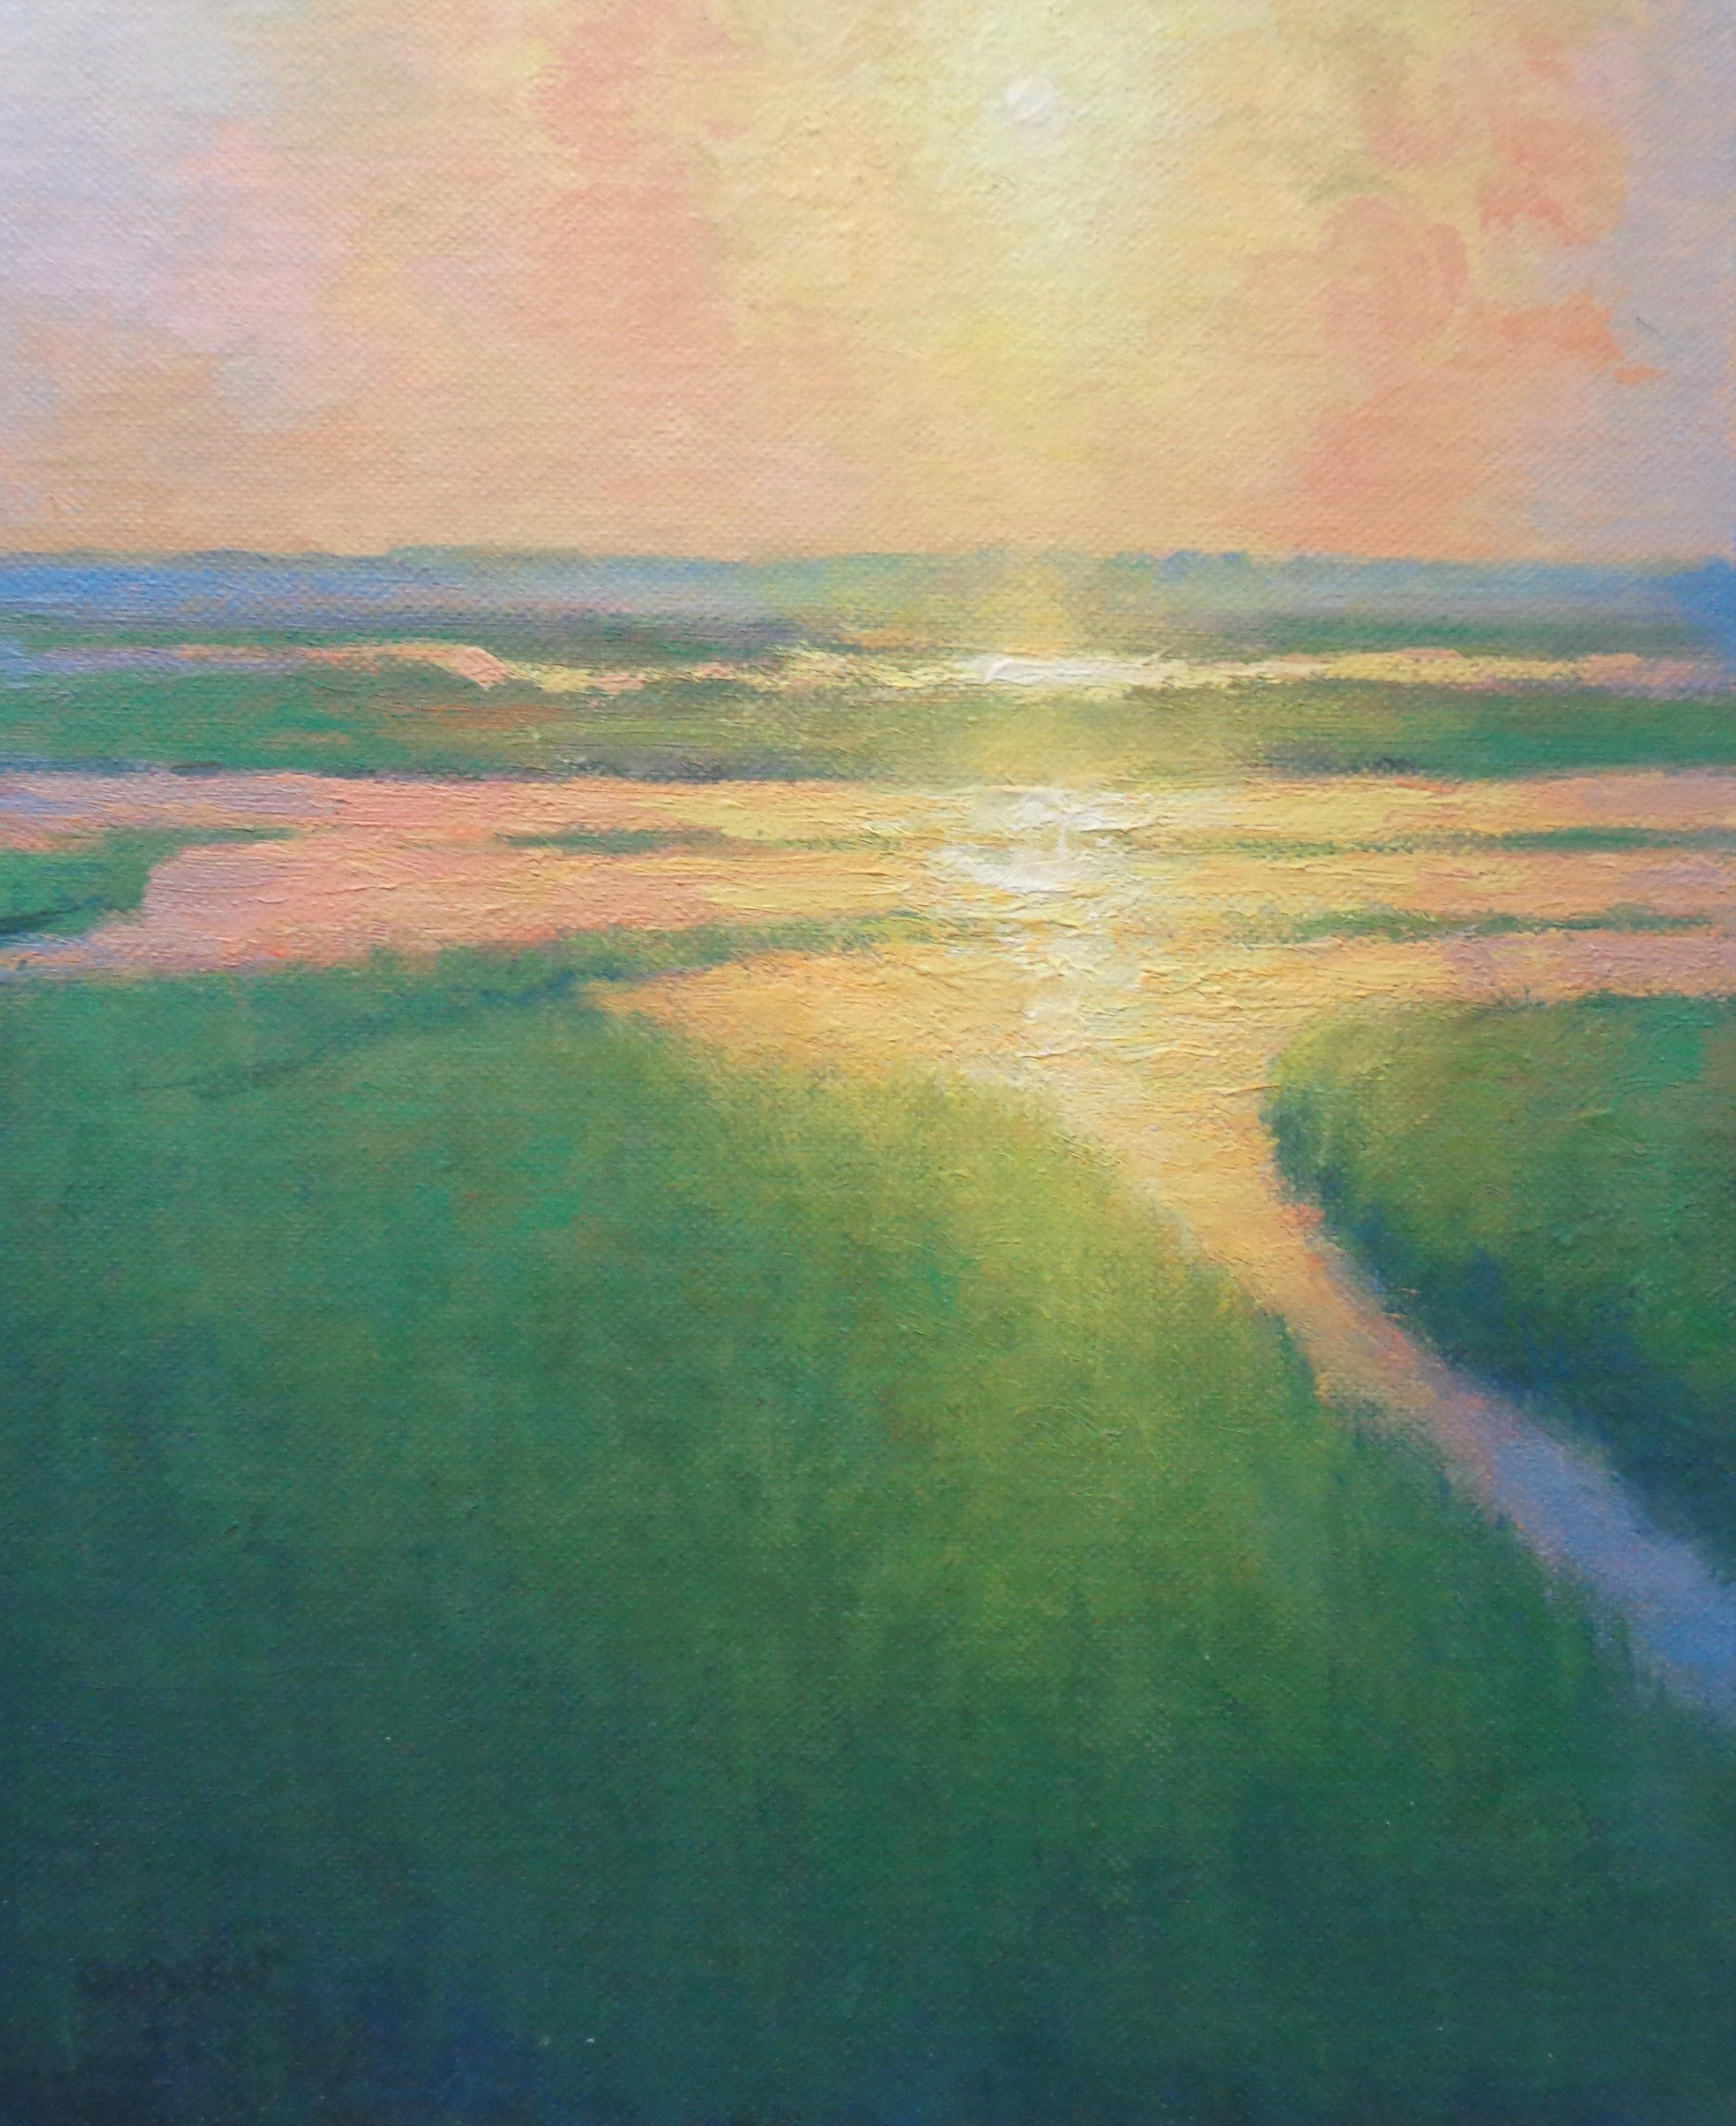  Ocean Impressionistic Seascape Painting Michael Budden Morning Marsh Light II For Sale 1